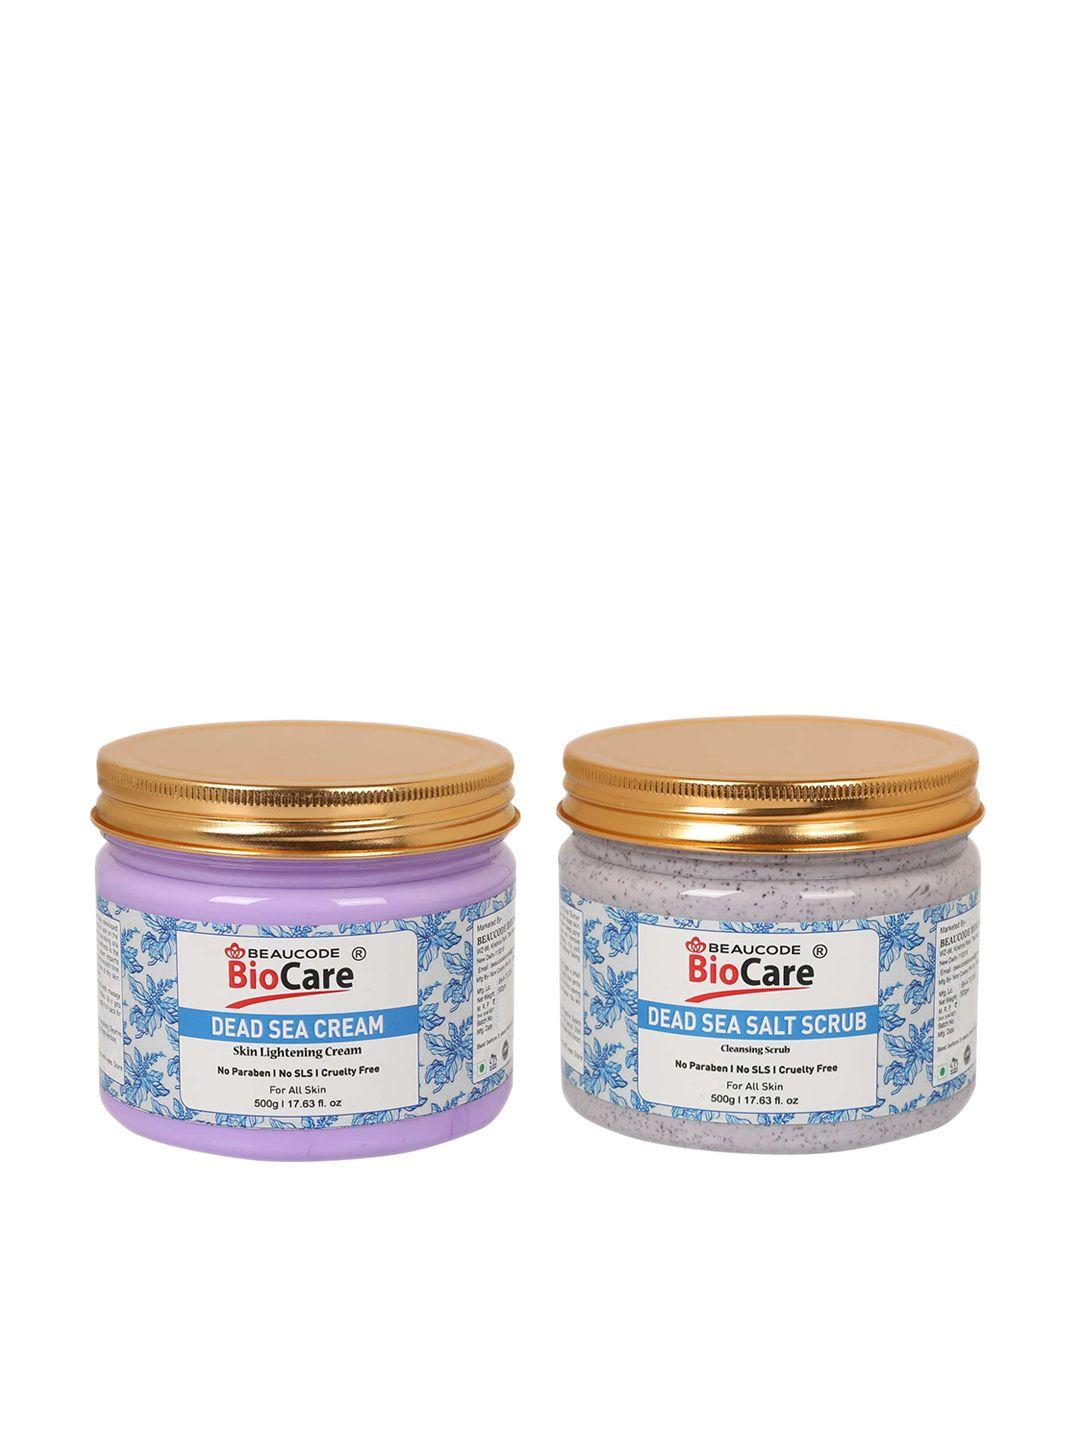 beaucode-biocare-adults-cream,-blue-pack-of-2-dead-sea-face-and-body-scrub-and-cream-500g